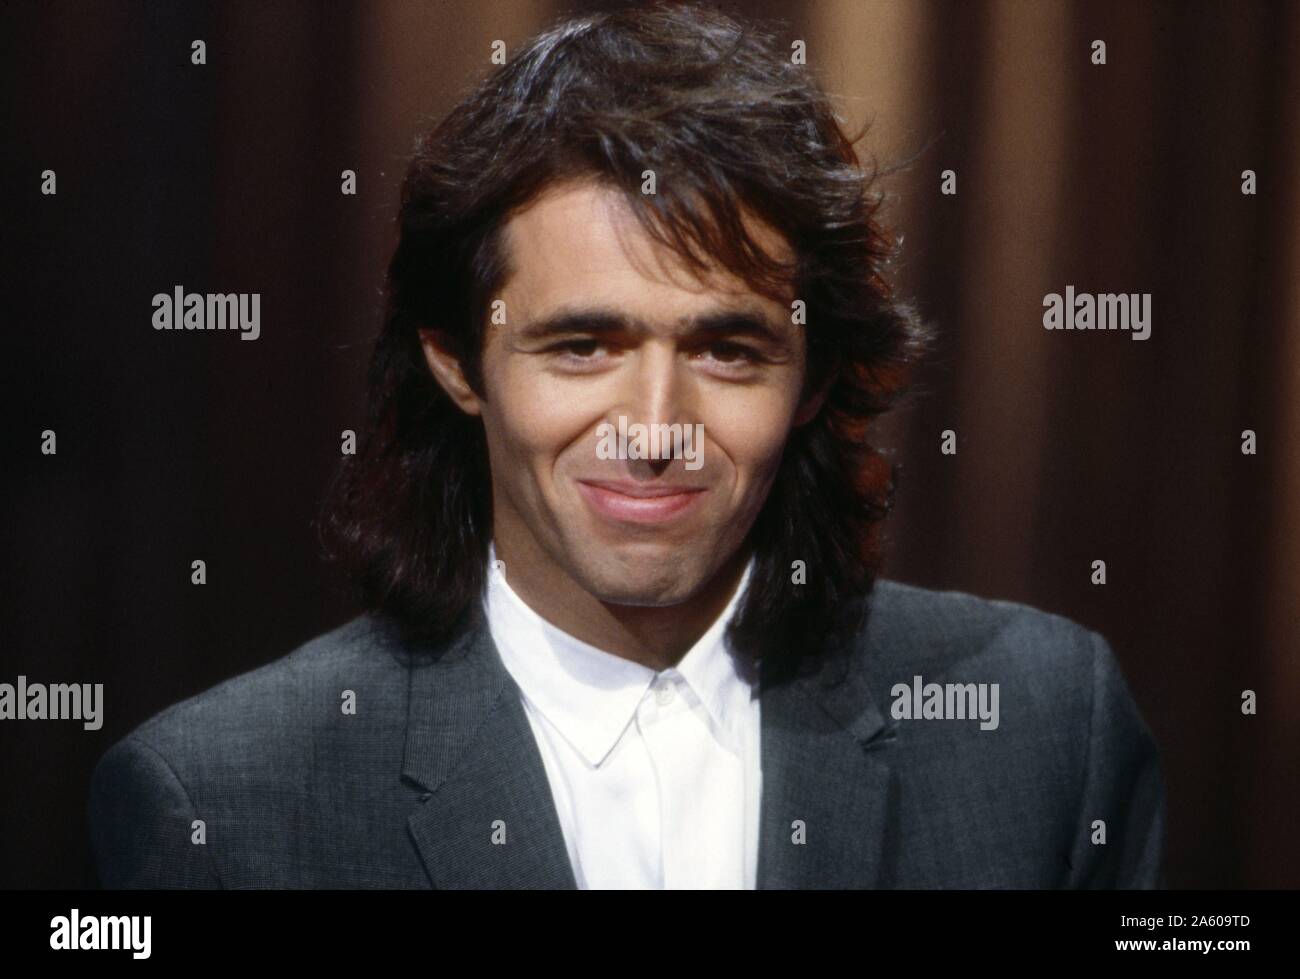 Jean Jacques Goldman Portrait On The Set Of The Television Show Champs Elysees In 1986 Stock Photo Alamy